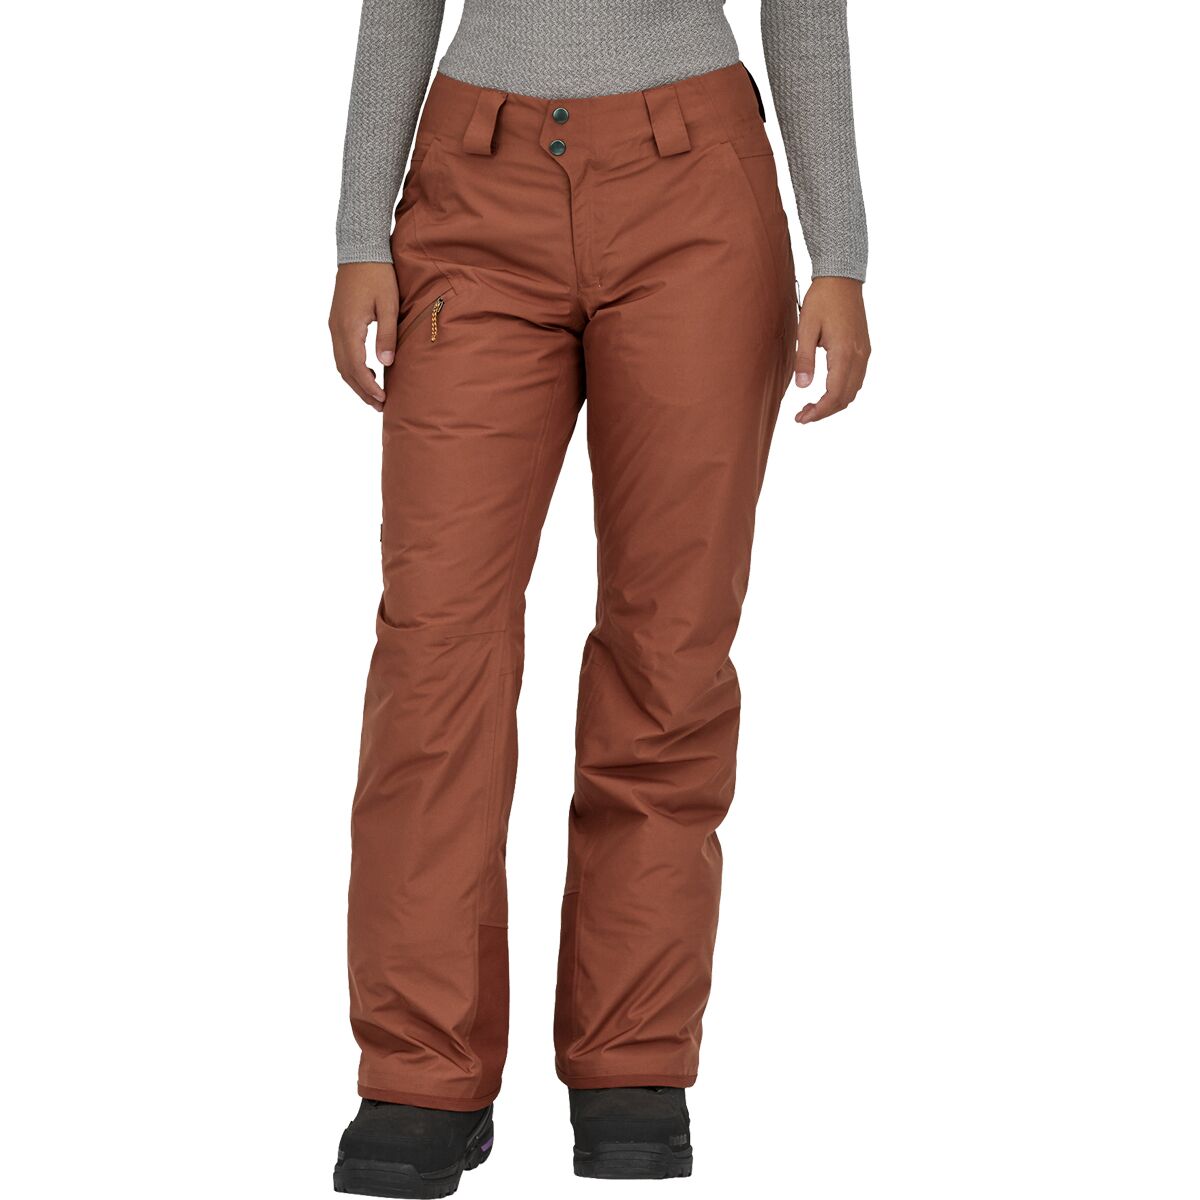 Patagonia Insulated Powder Town Pant - Women's